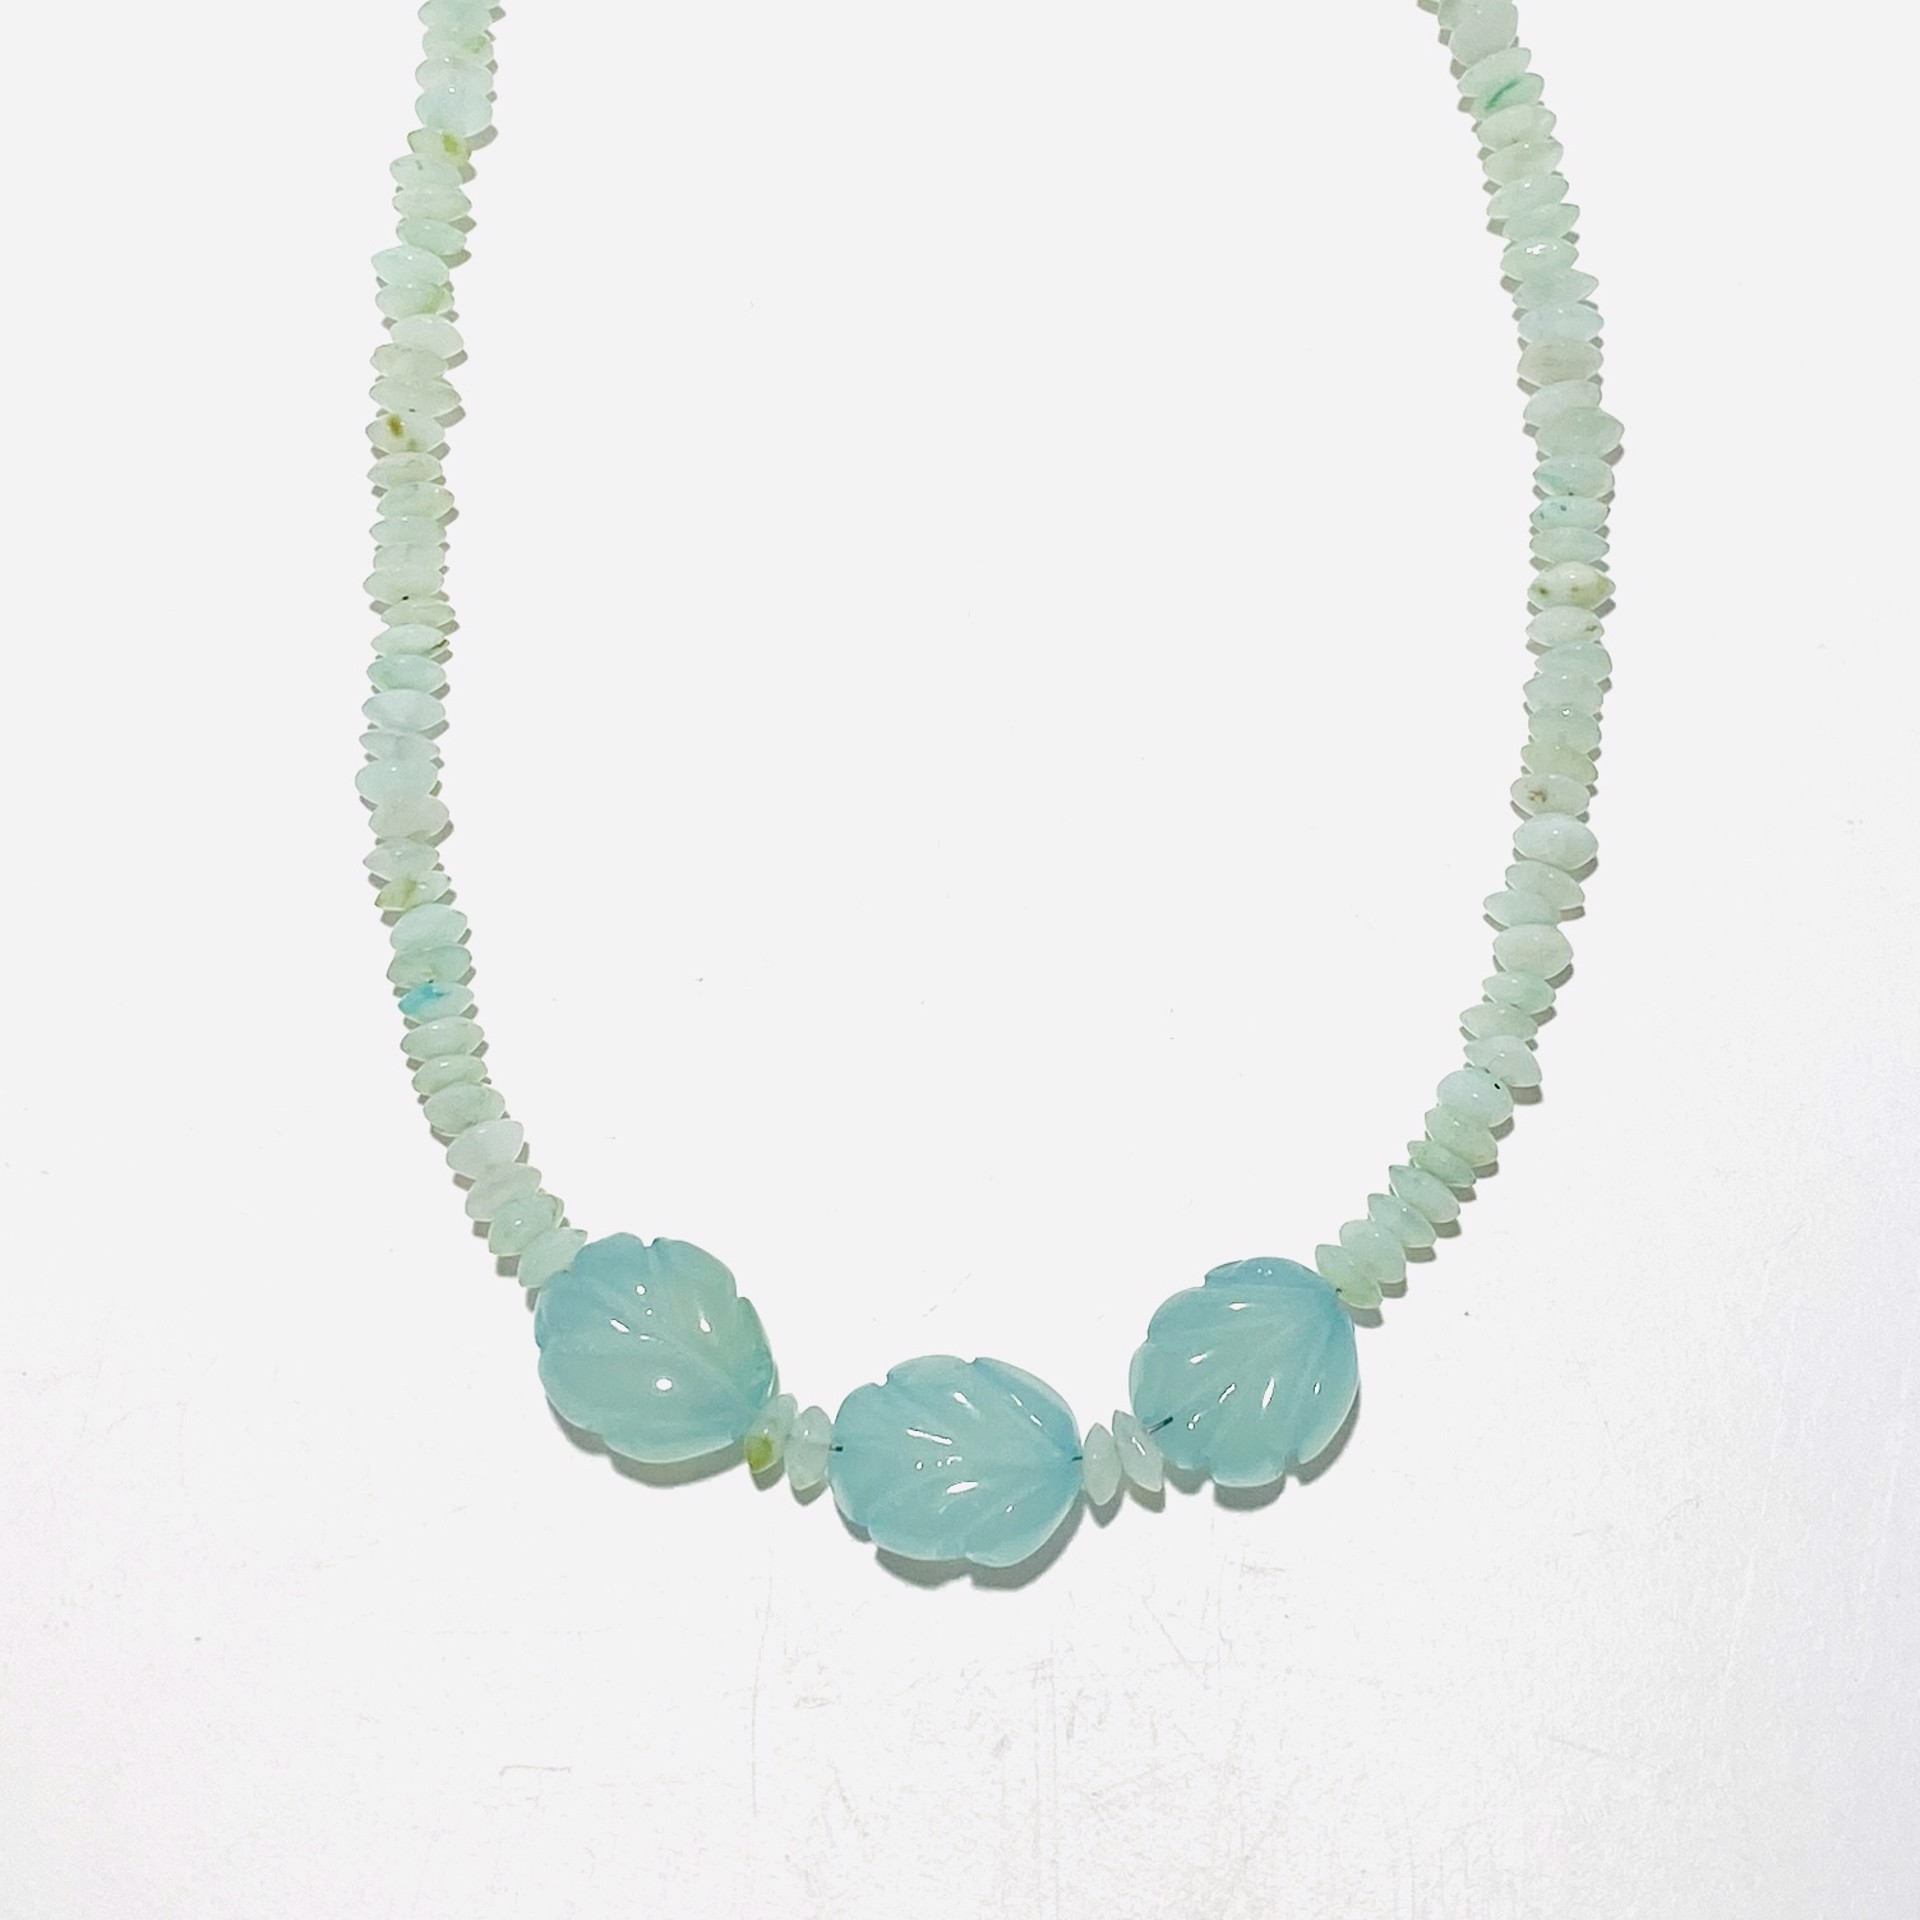 Peruvian Opal Bead, Three Carved Aqua Chalcedony Leaves Necklace NT23-03 by Nance Trueworthy